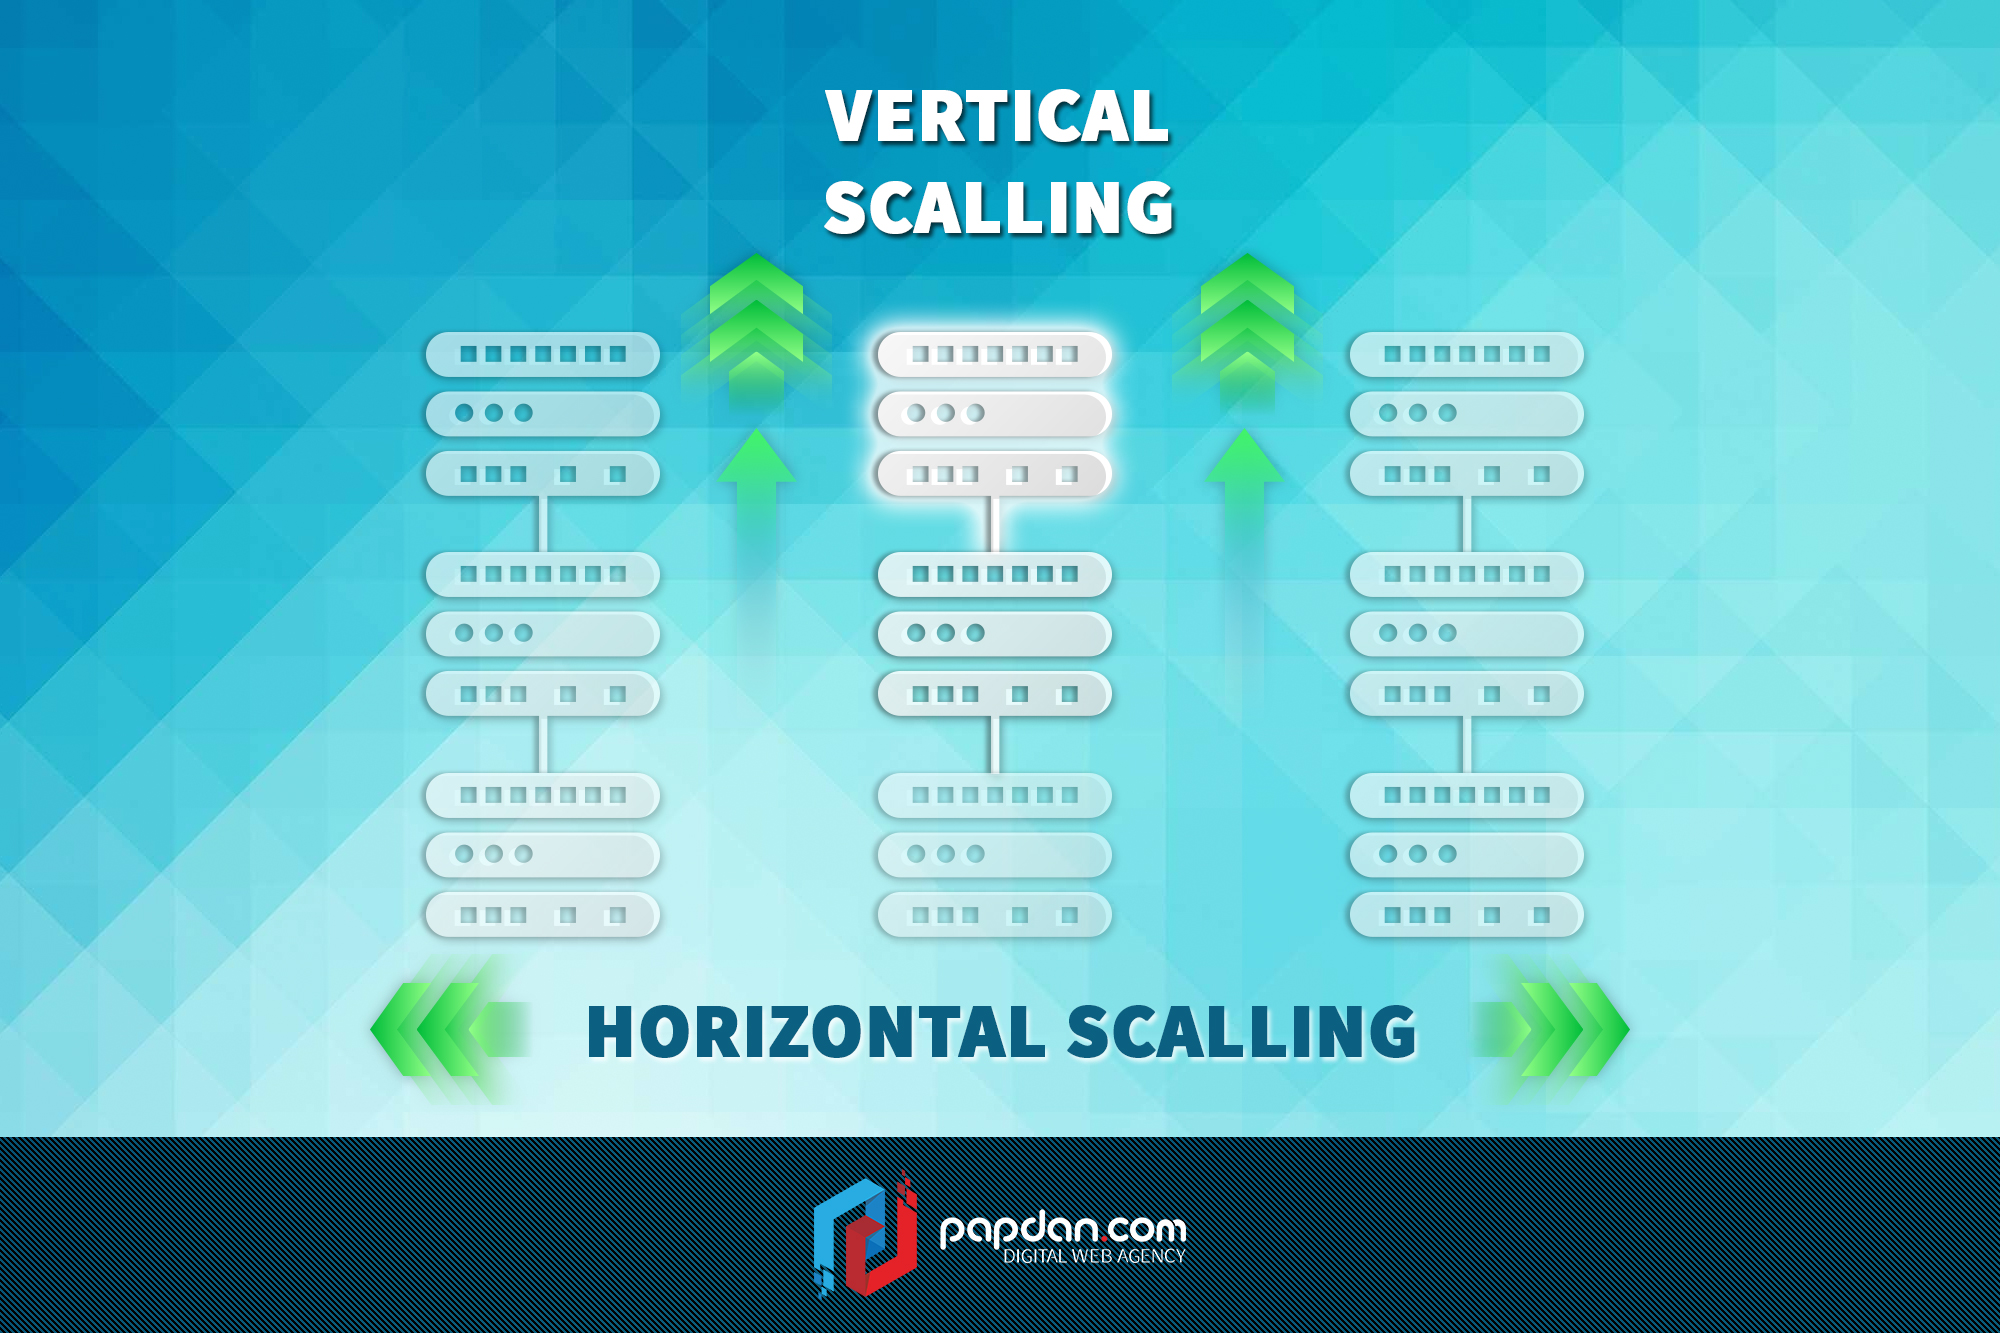 Knowing the Differences between Scaling Horizontally vs Scaling Vertically